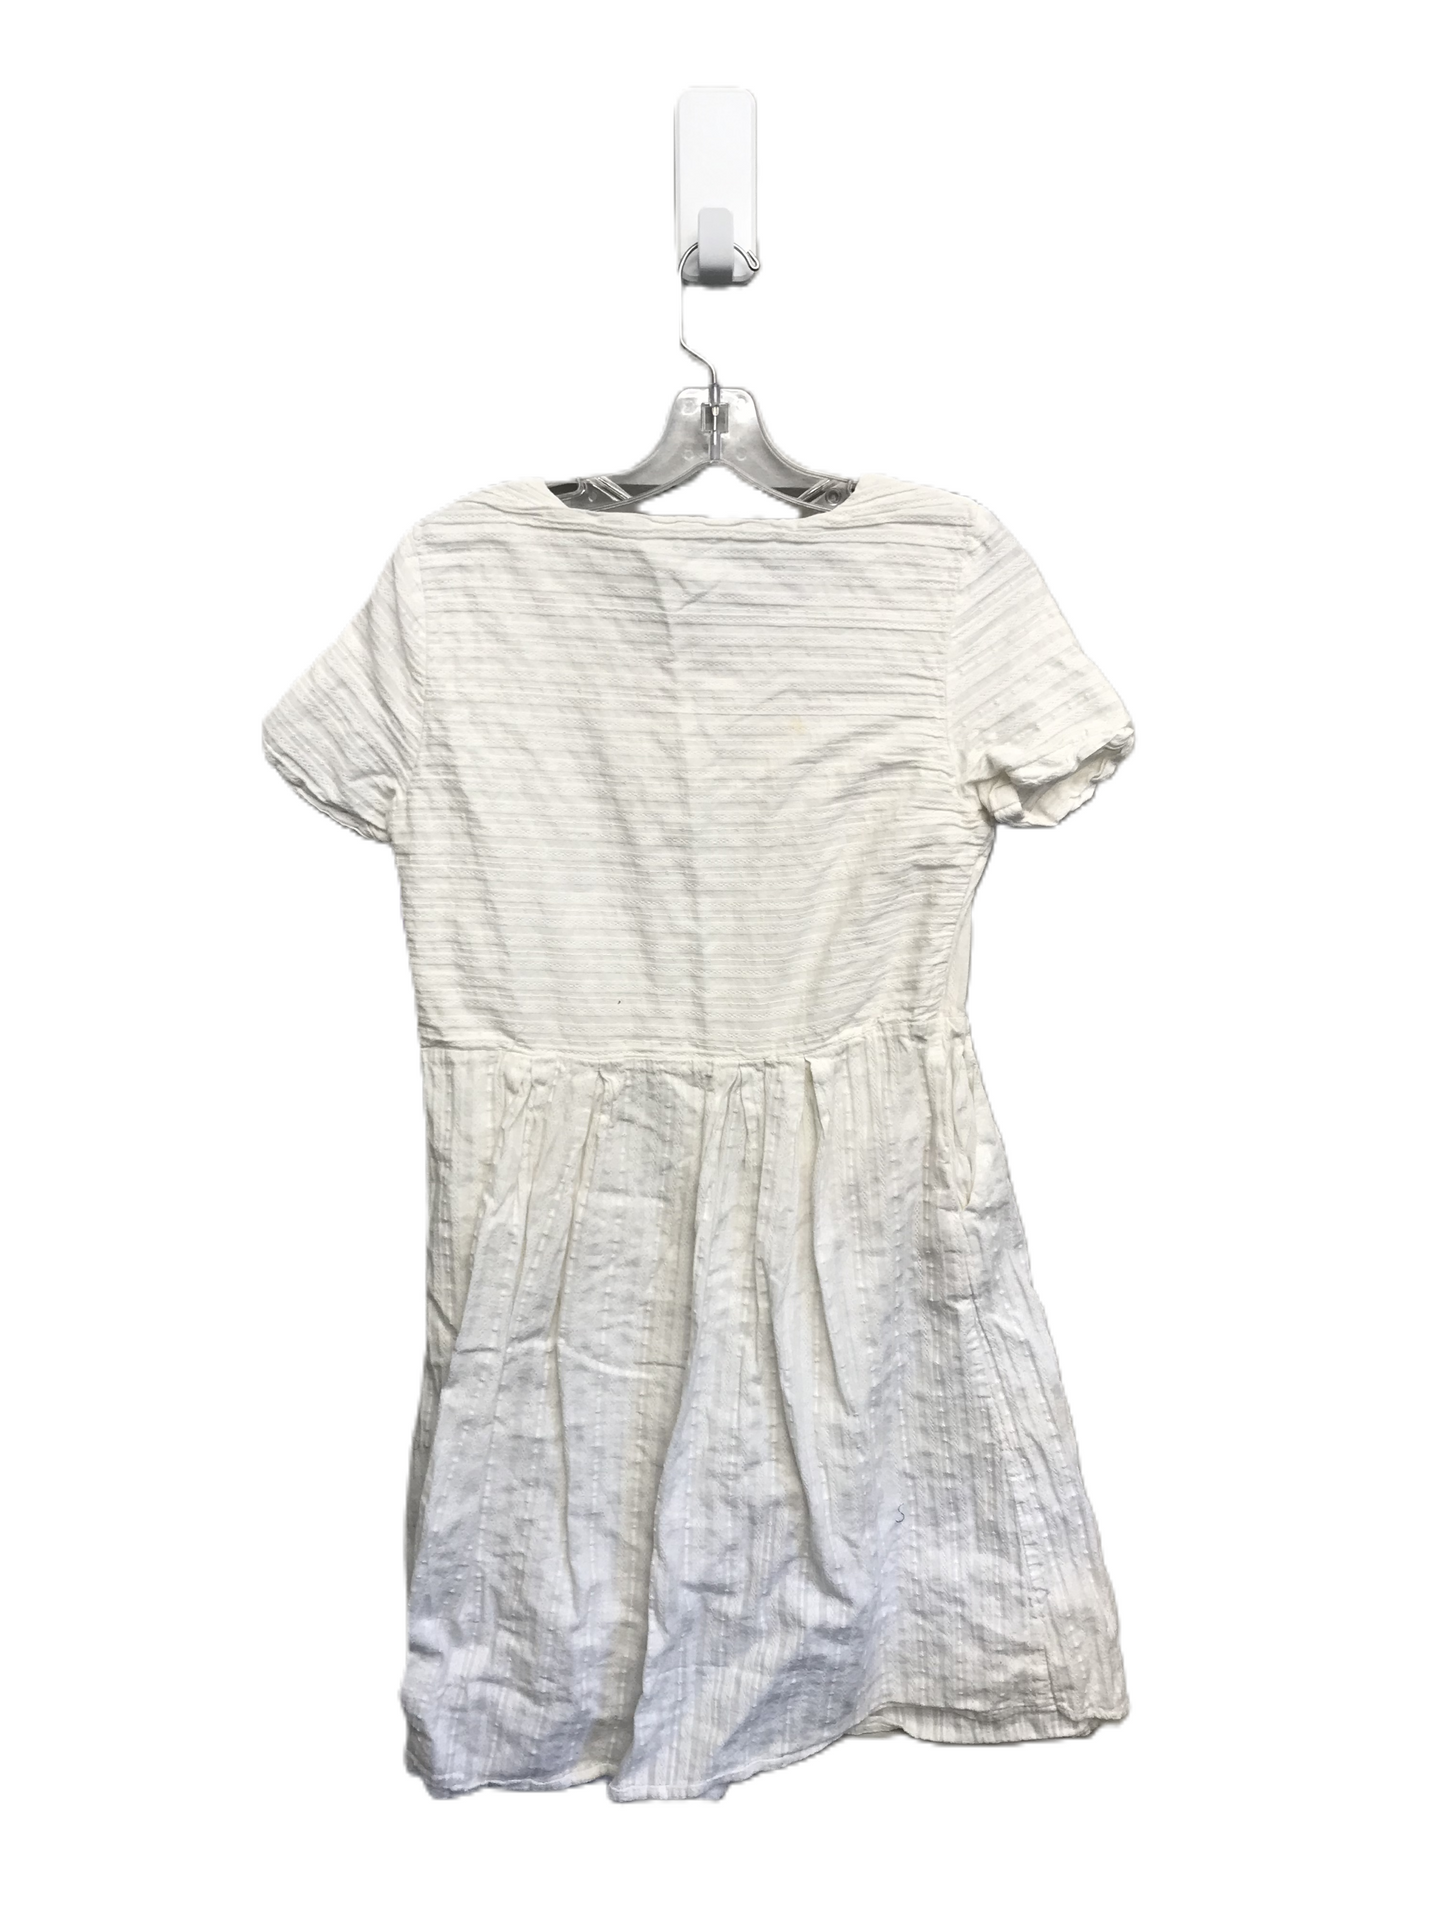 White Dress Casual Short By Tea N Rose, Size: M